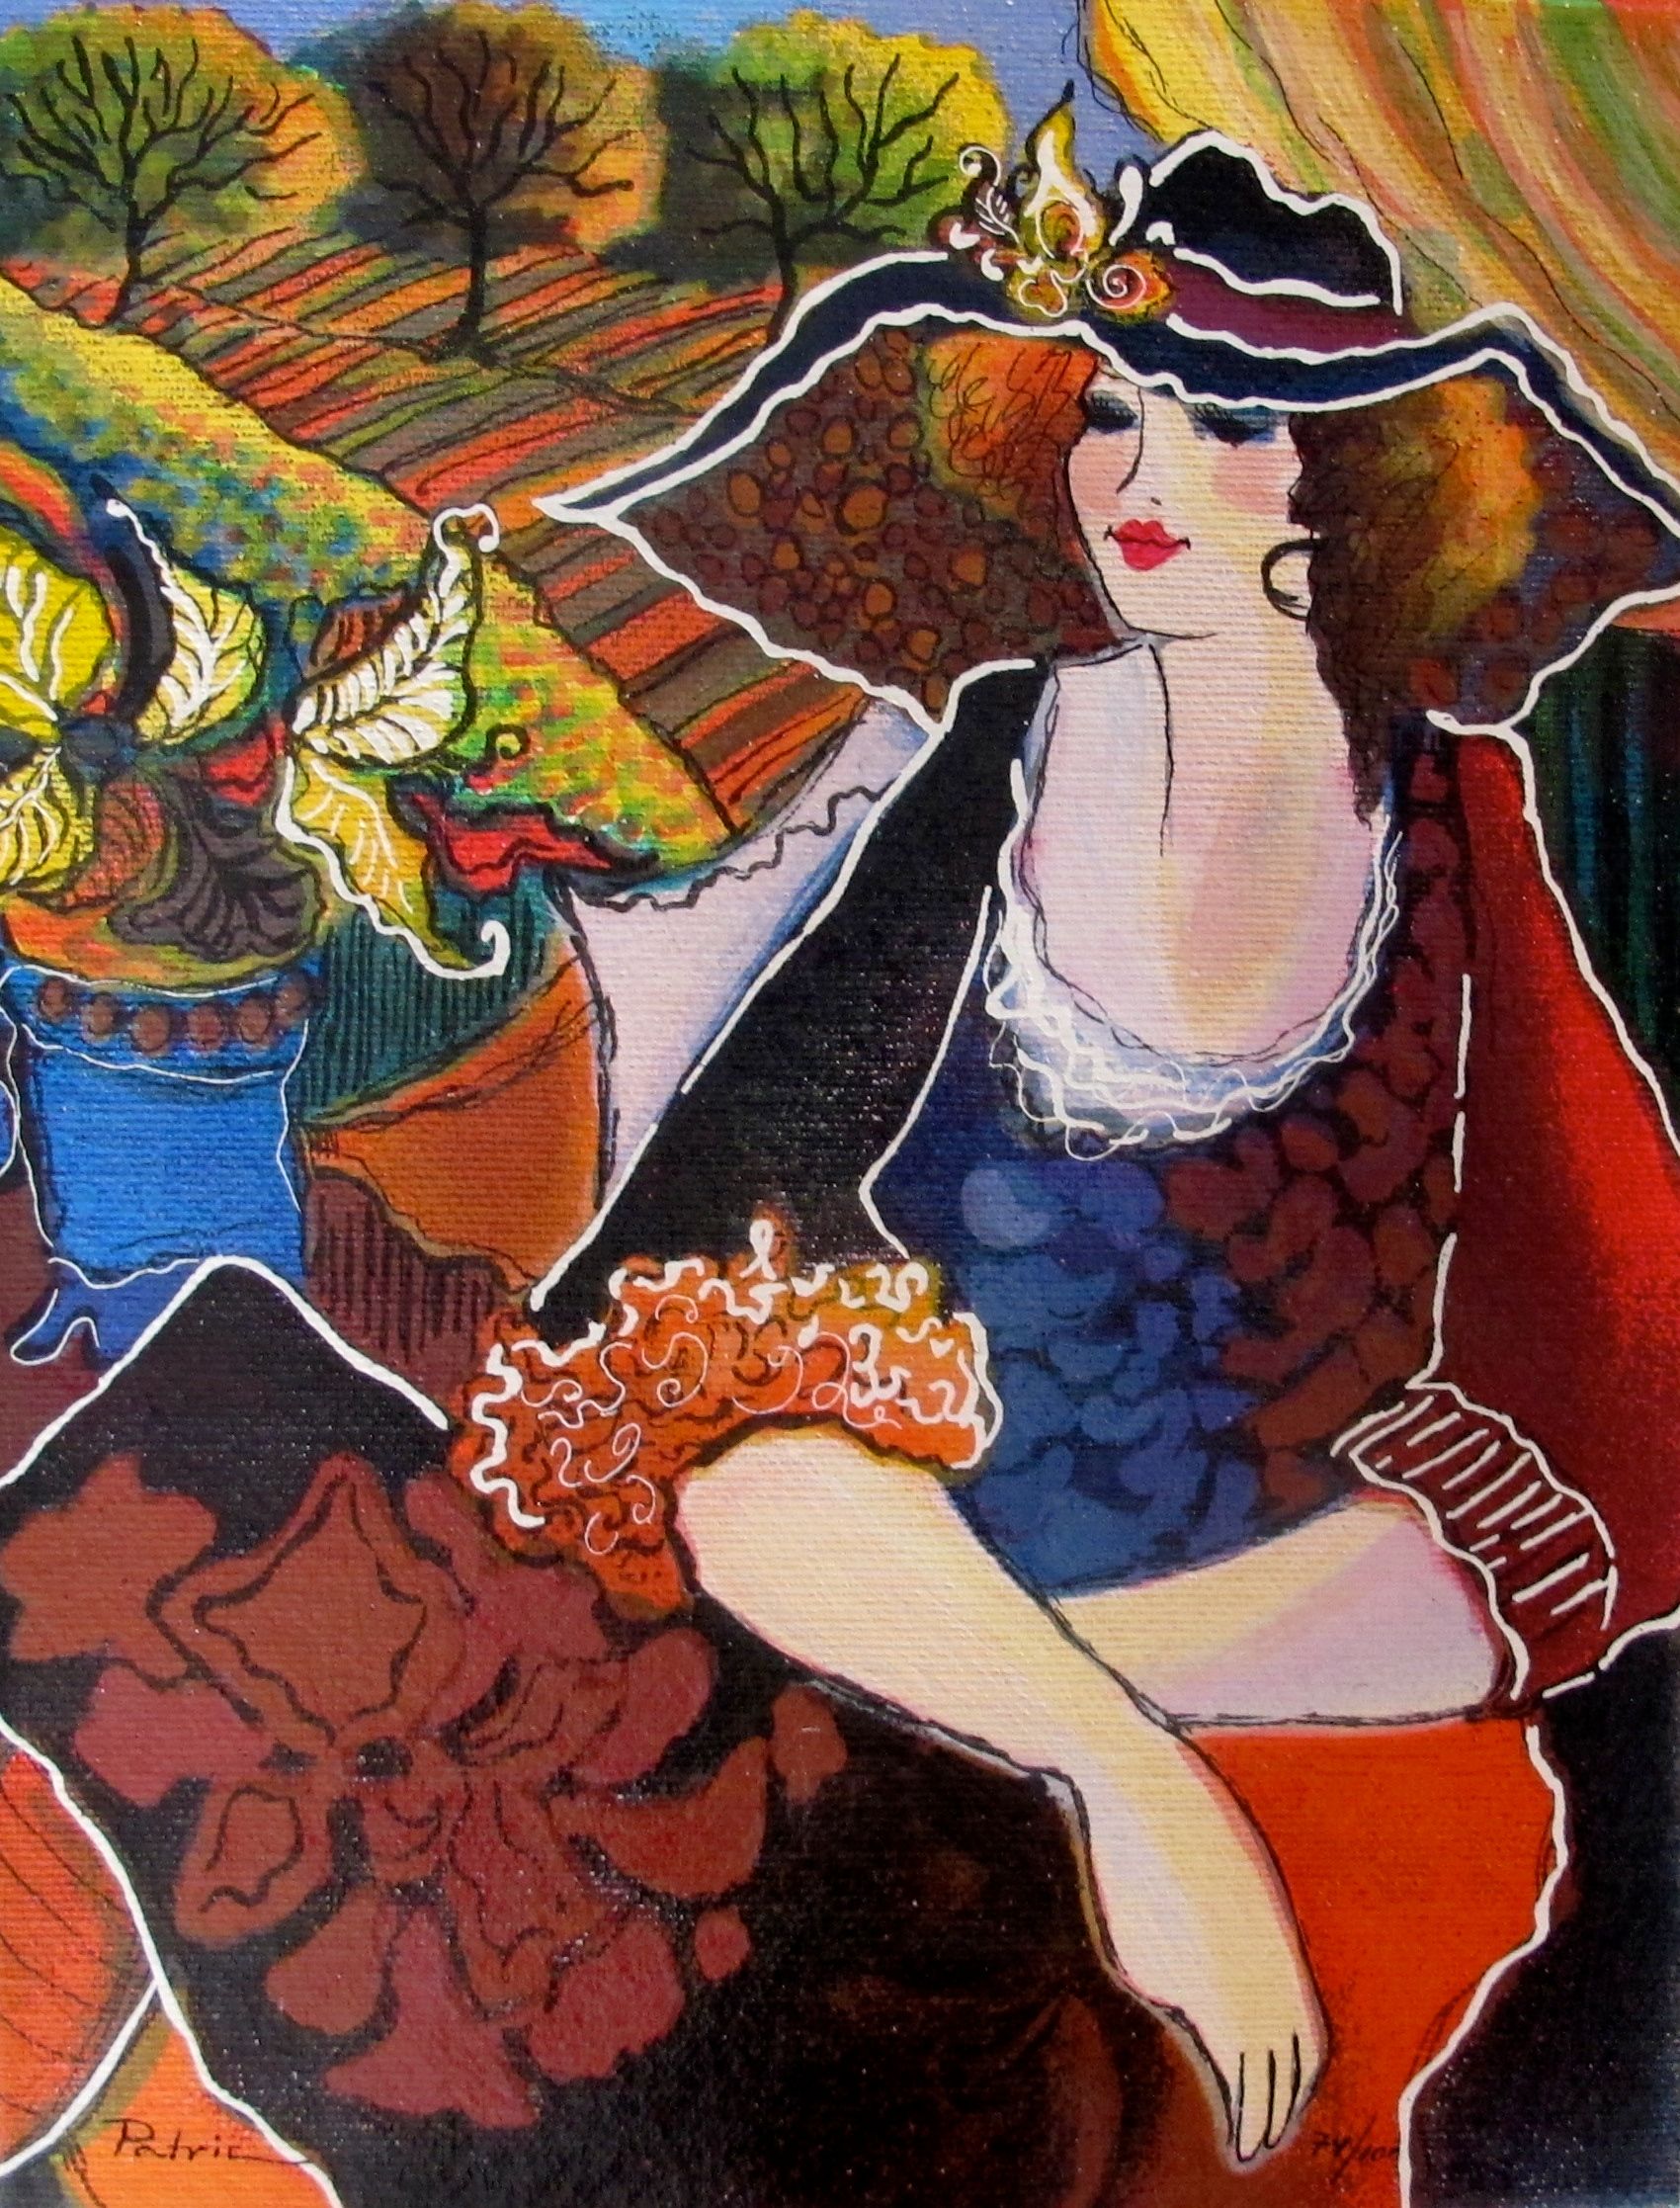 Patricia Govezensky LADY CHAPEAU Hand Signed Limited Edition Serigraph on Canvas